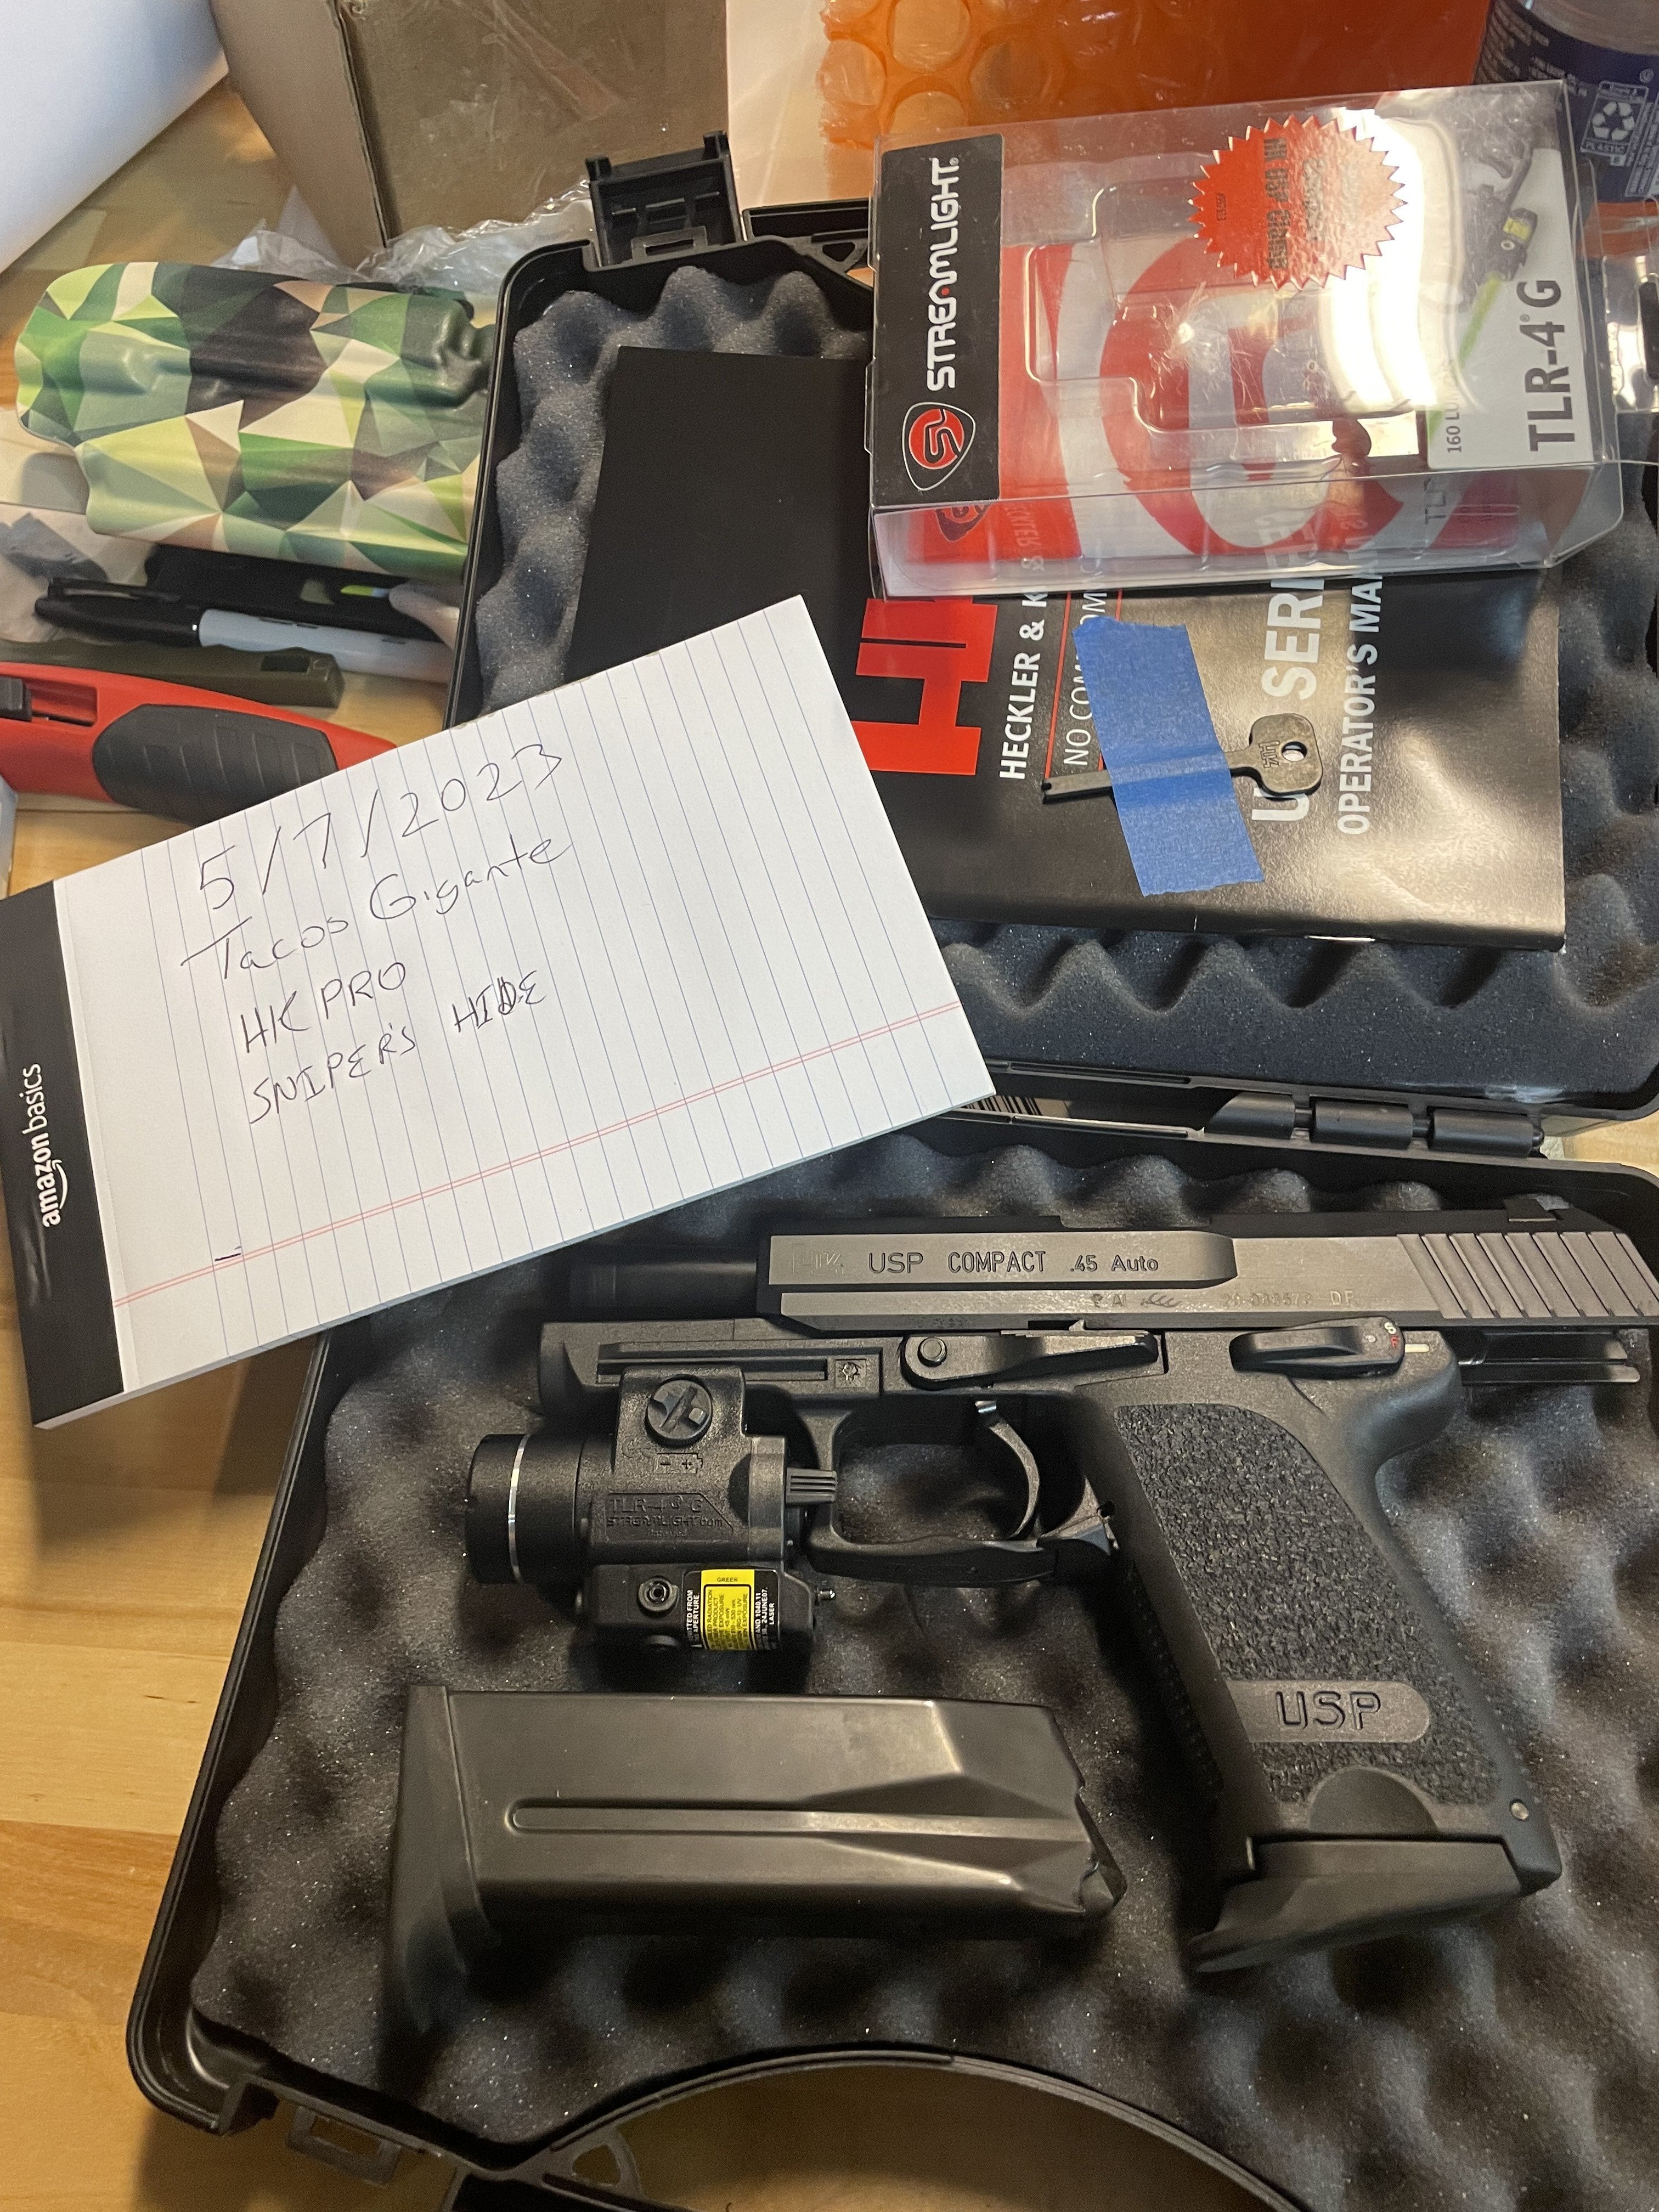 HK USP 45 Compact V1 AI Date Code w/ 2x8 round mags and Streamlight TLR-4G